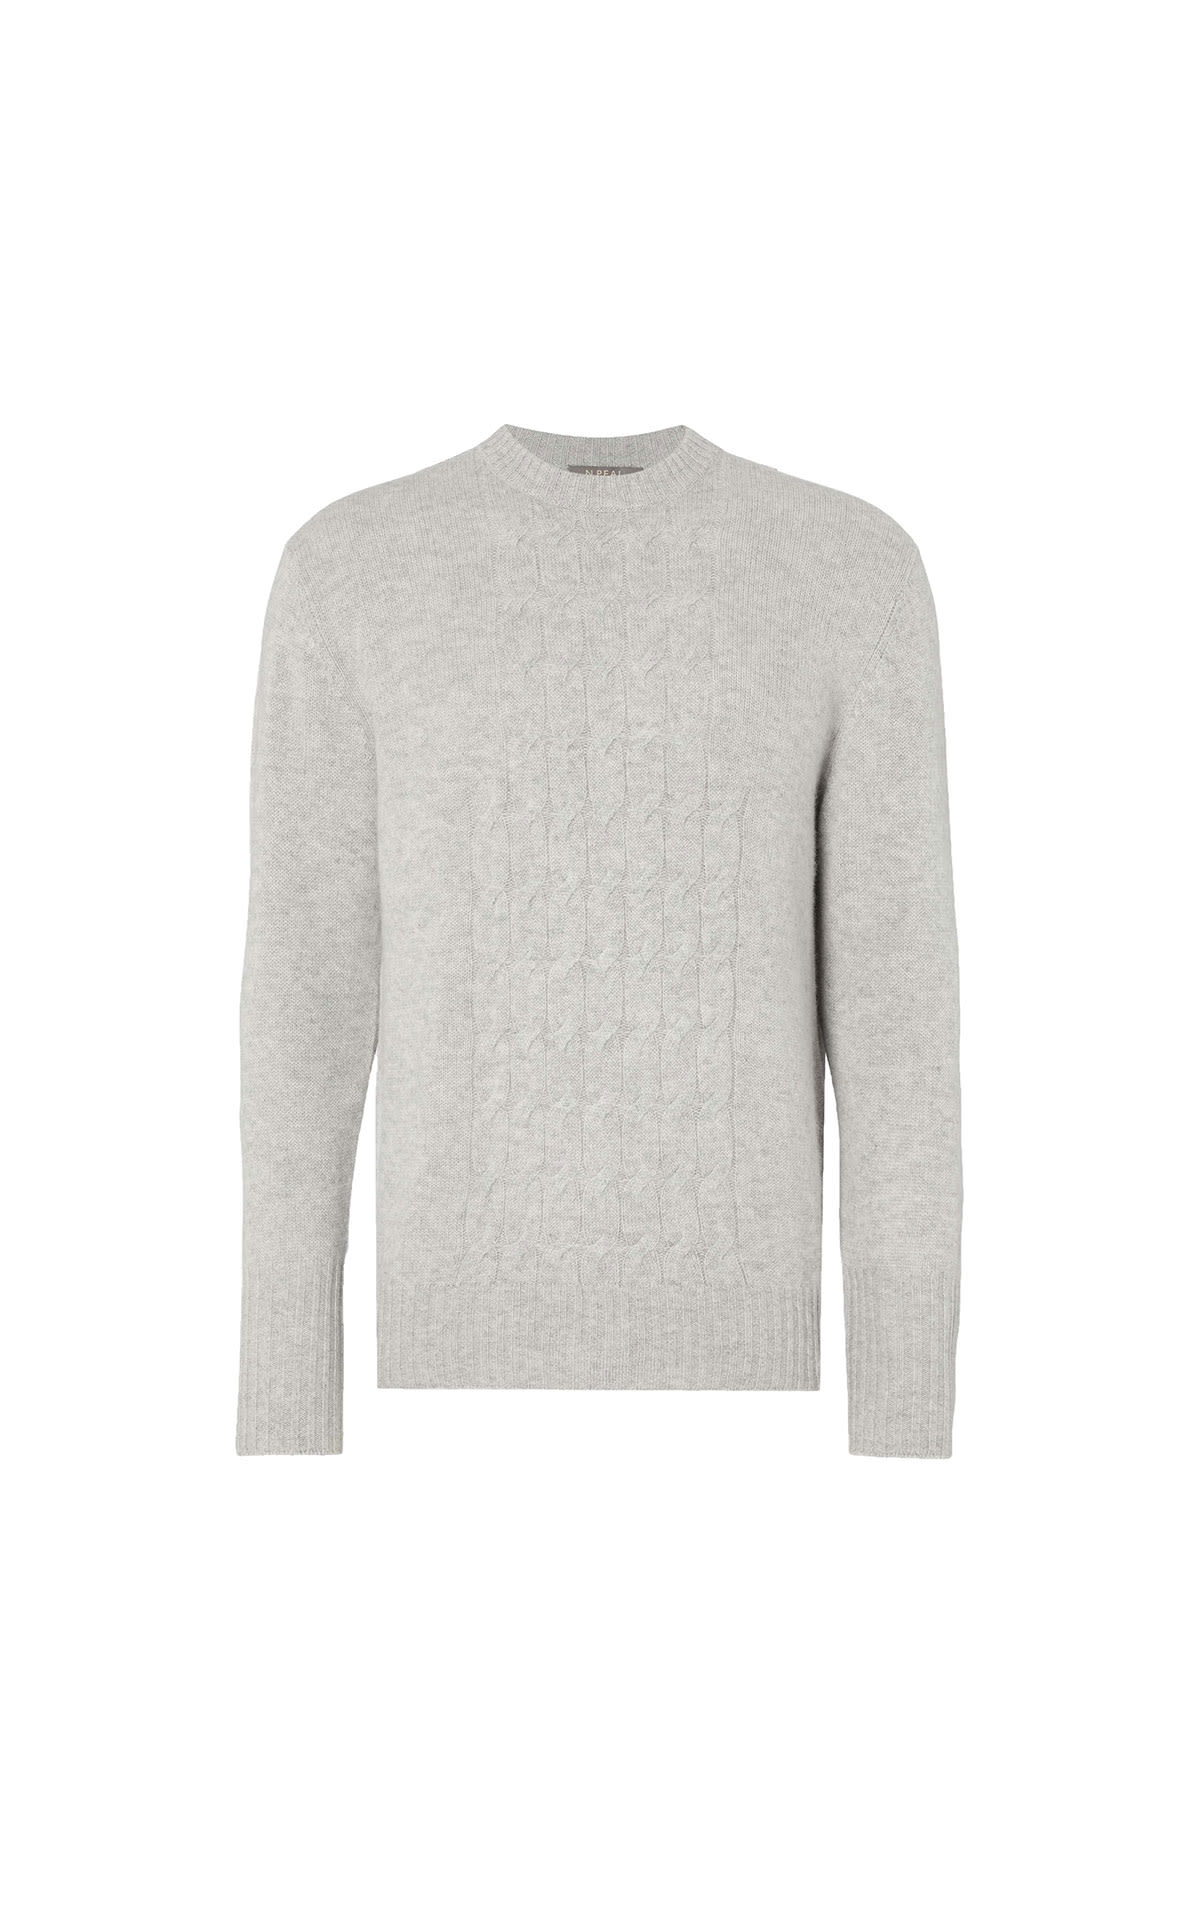 N.Peal Men’s placement cable sweater  from Bicester Village